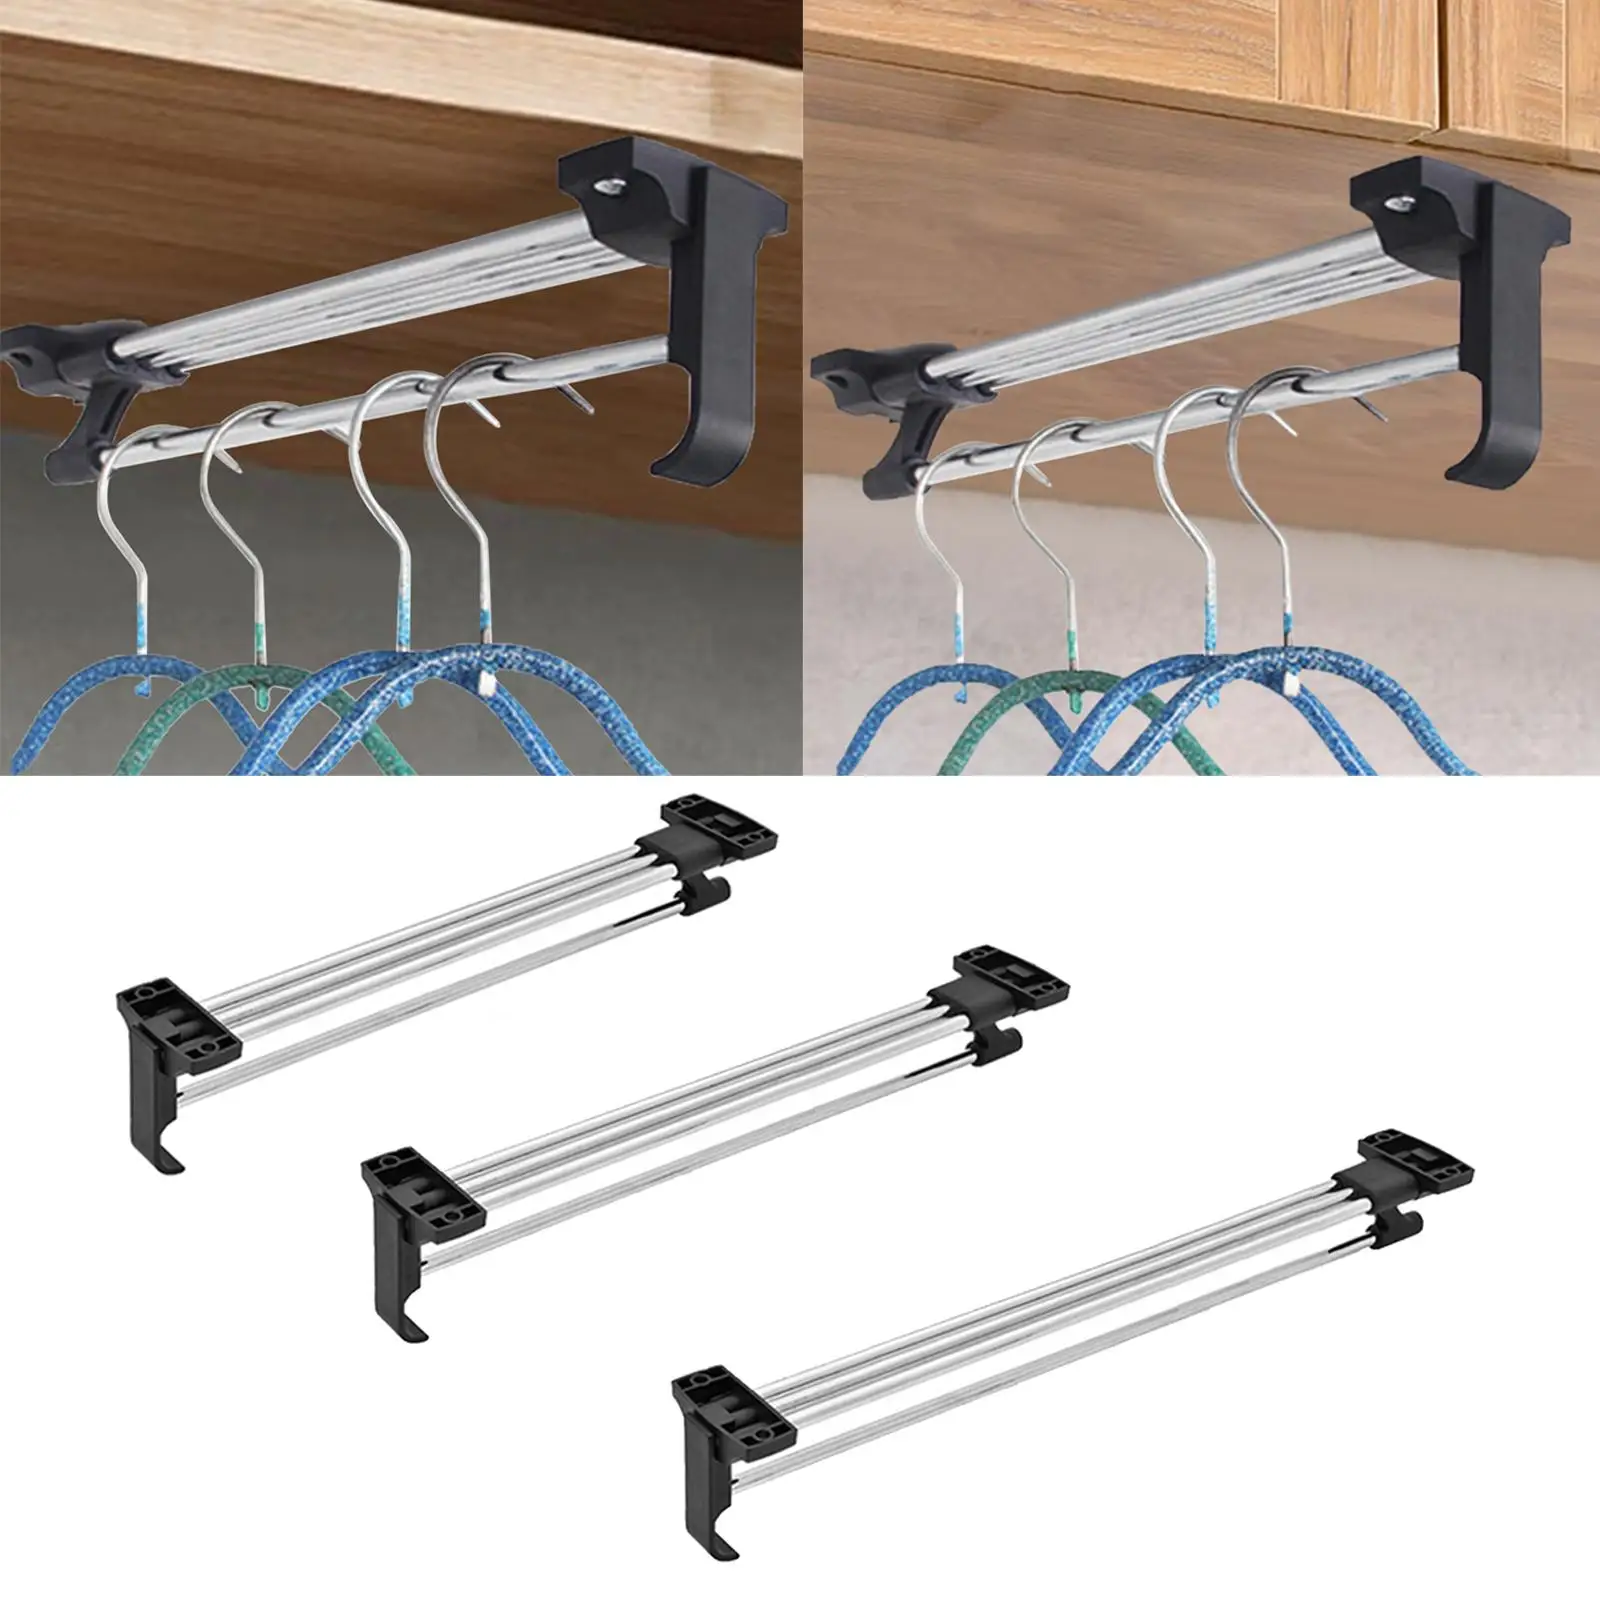 Multipurpose Telescopic Clothing Rod Tension Rod Clothes Hanger Support Rod Closet Rod for Laundry Room Wardrobe Bedroom Home